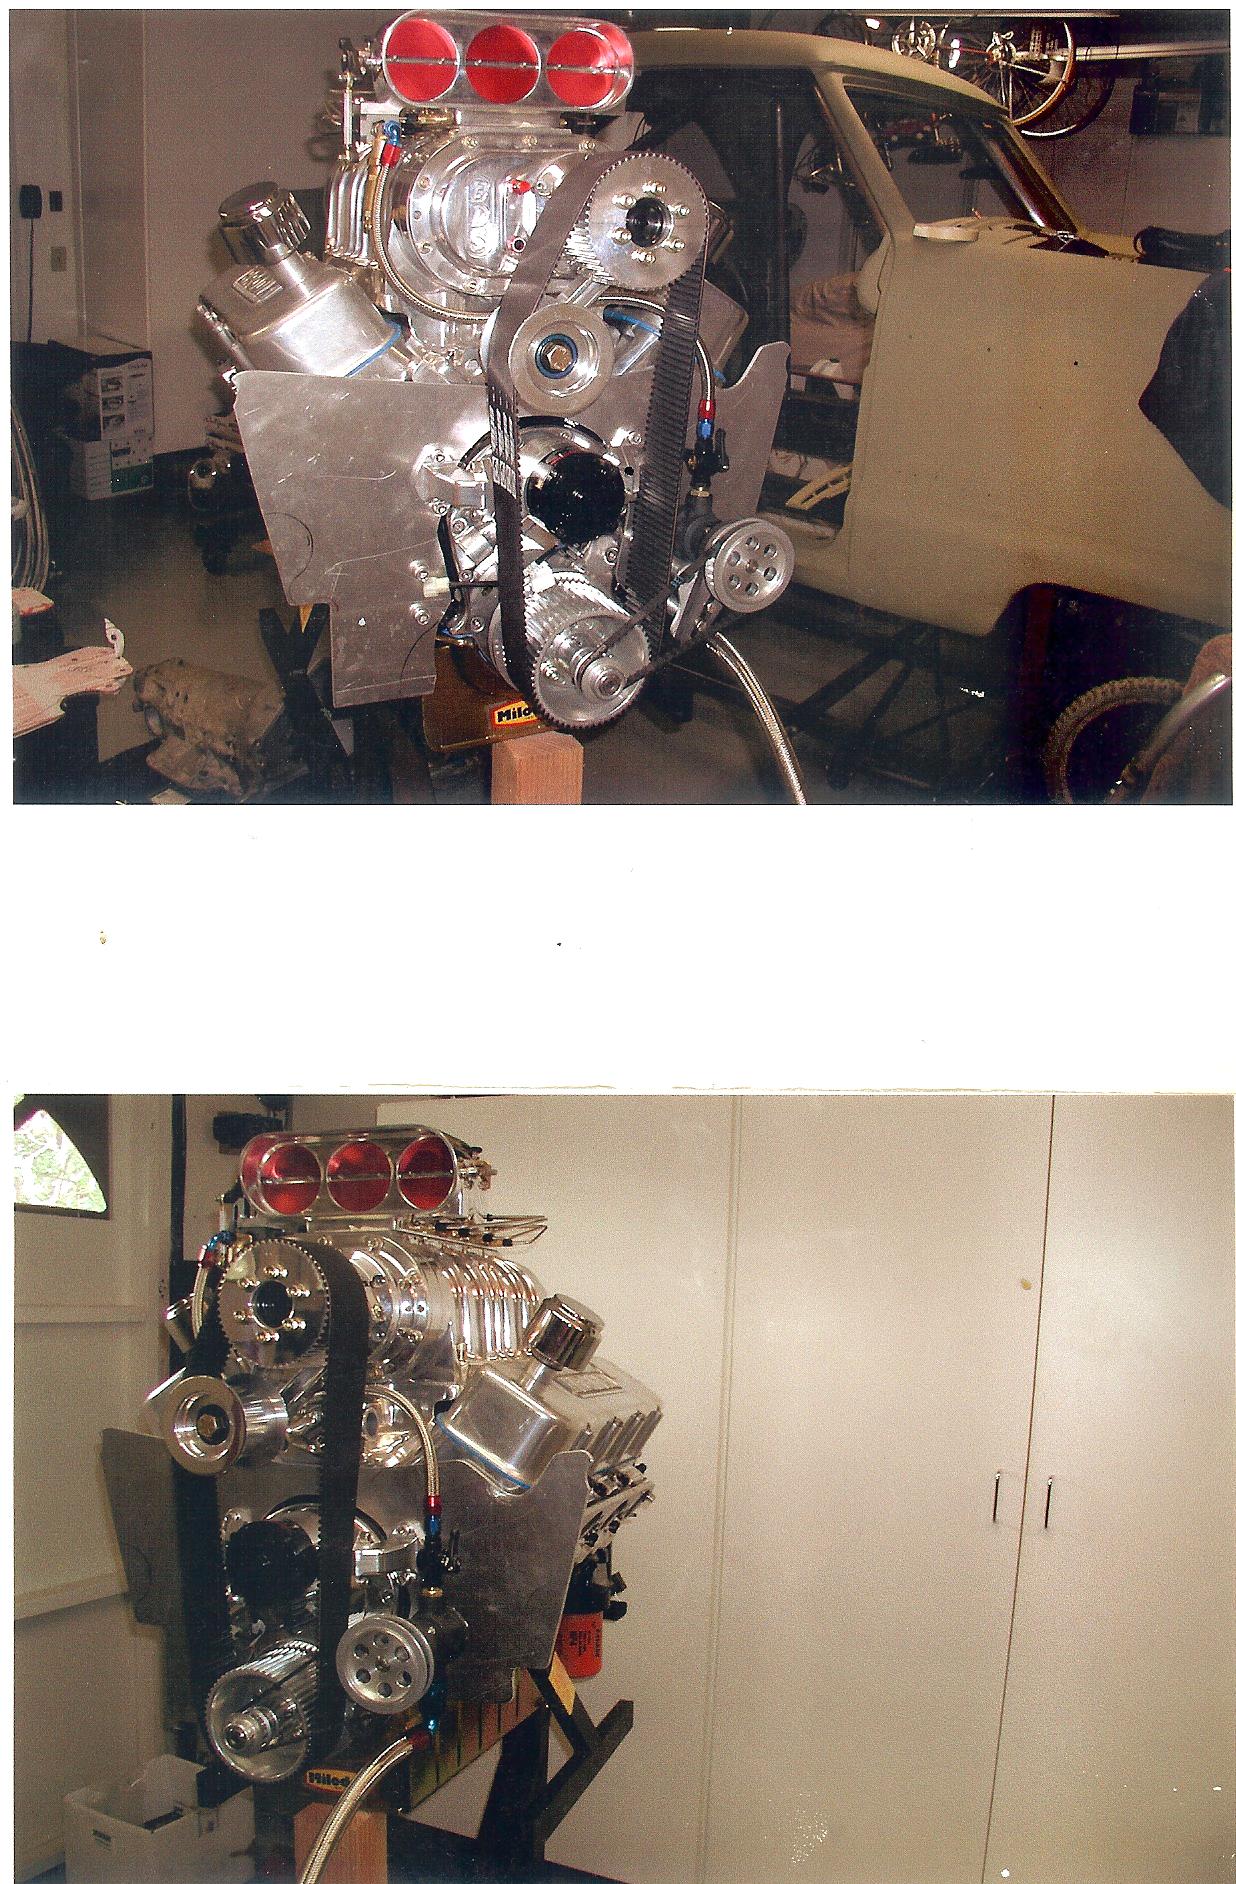 Two View of the Engine